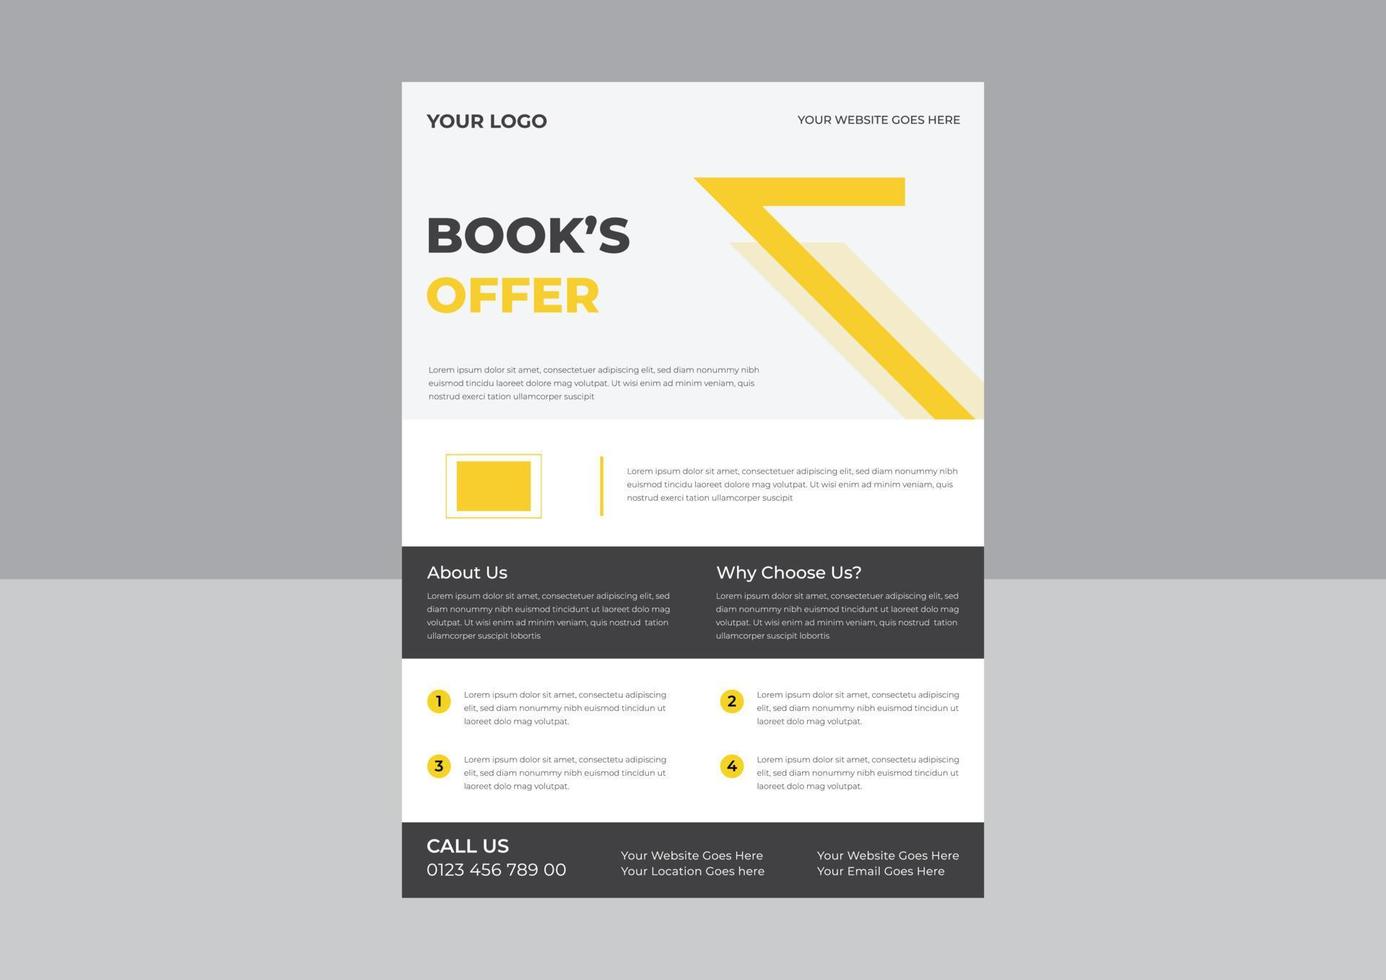 Bookstore flyer design template,  bookshop, library, book lover, e-book, education. A4 vector illustration for poster, banner, advertising, cover.